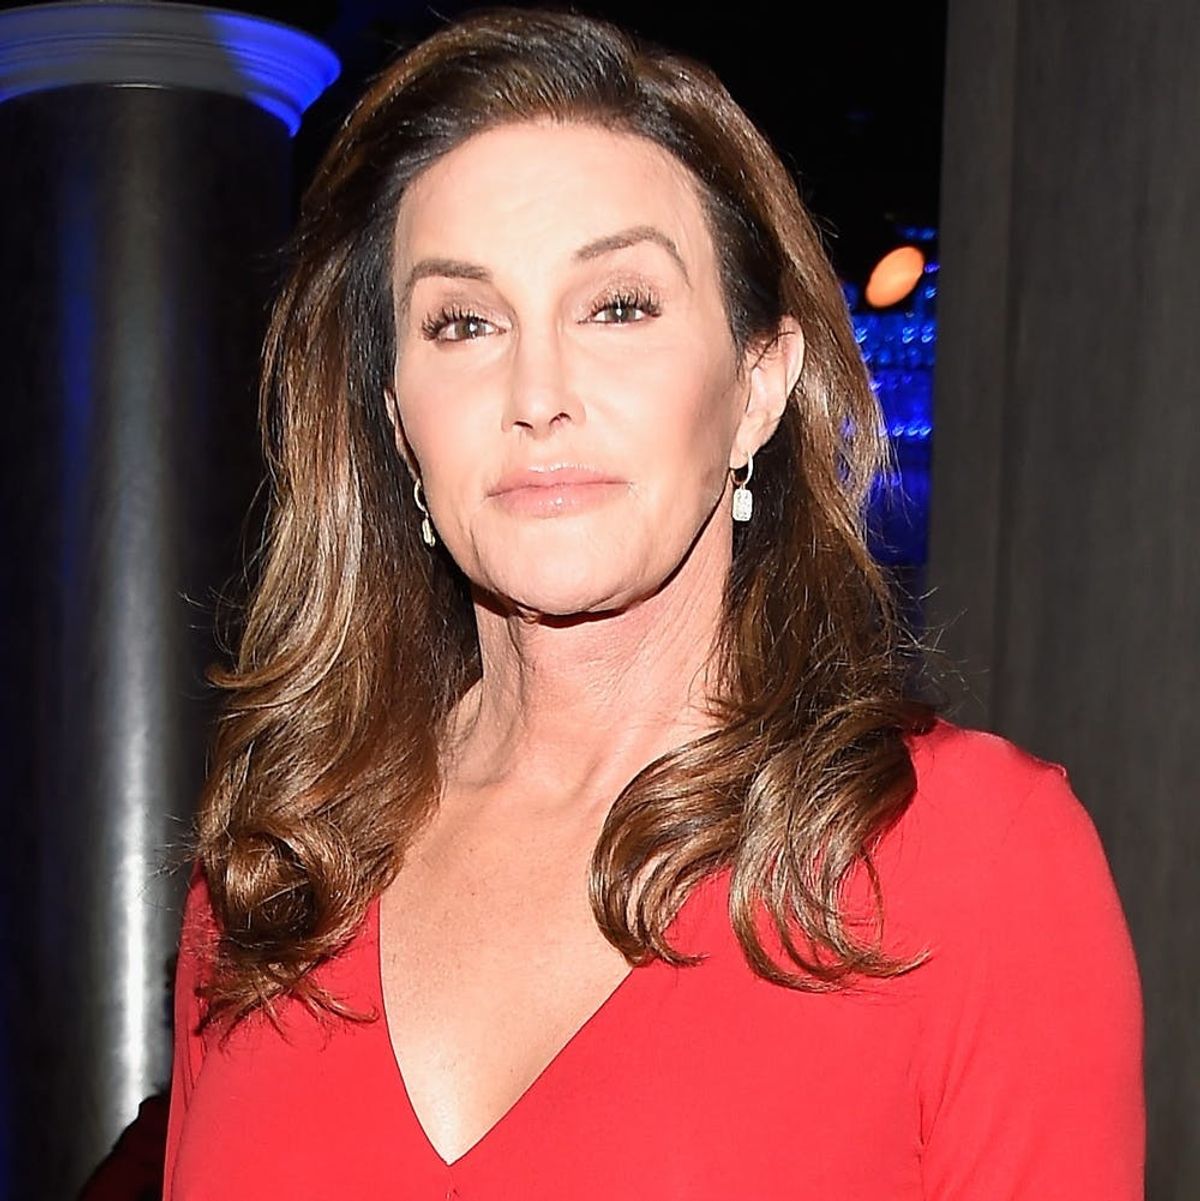 Caitlyn Jenner Trying on a Wedding Dress Will Make You Cry